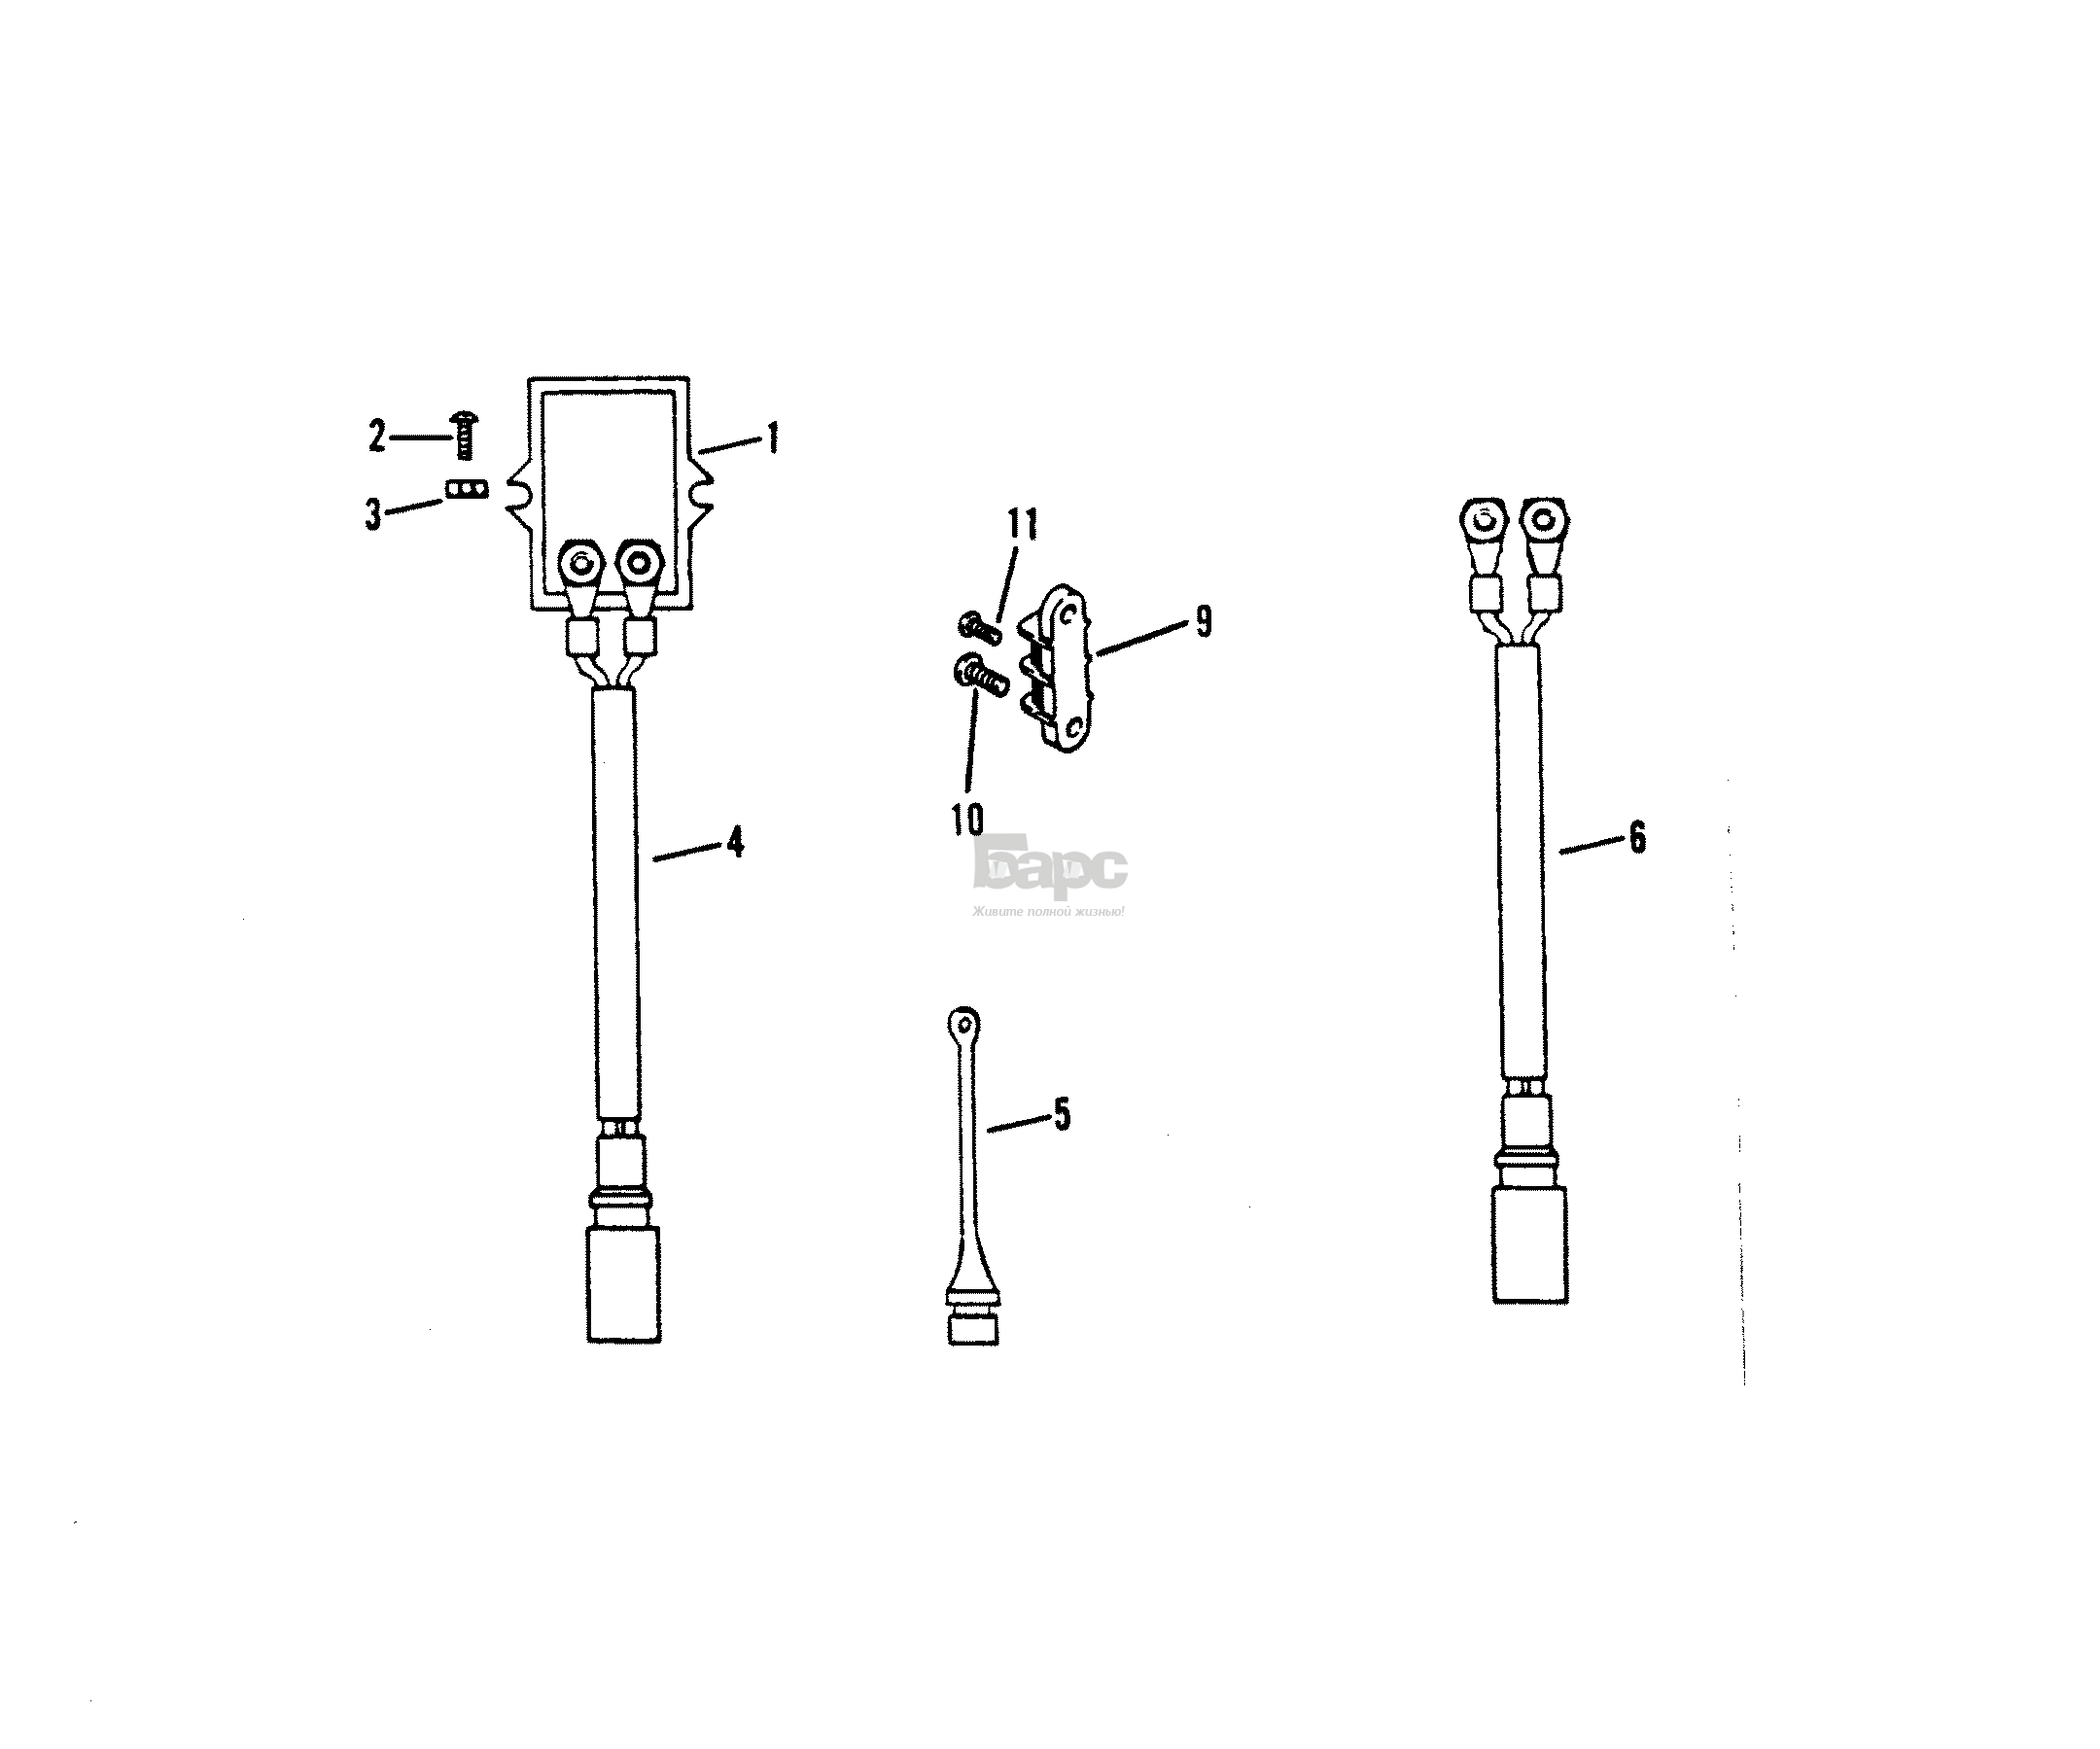 ELECTRIC COMPONENTS (VOLTAGE REGULATOR AND HARNESS)